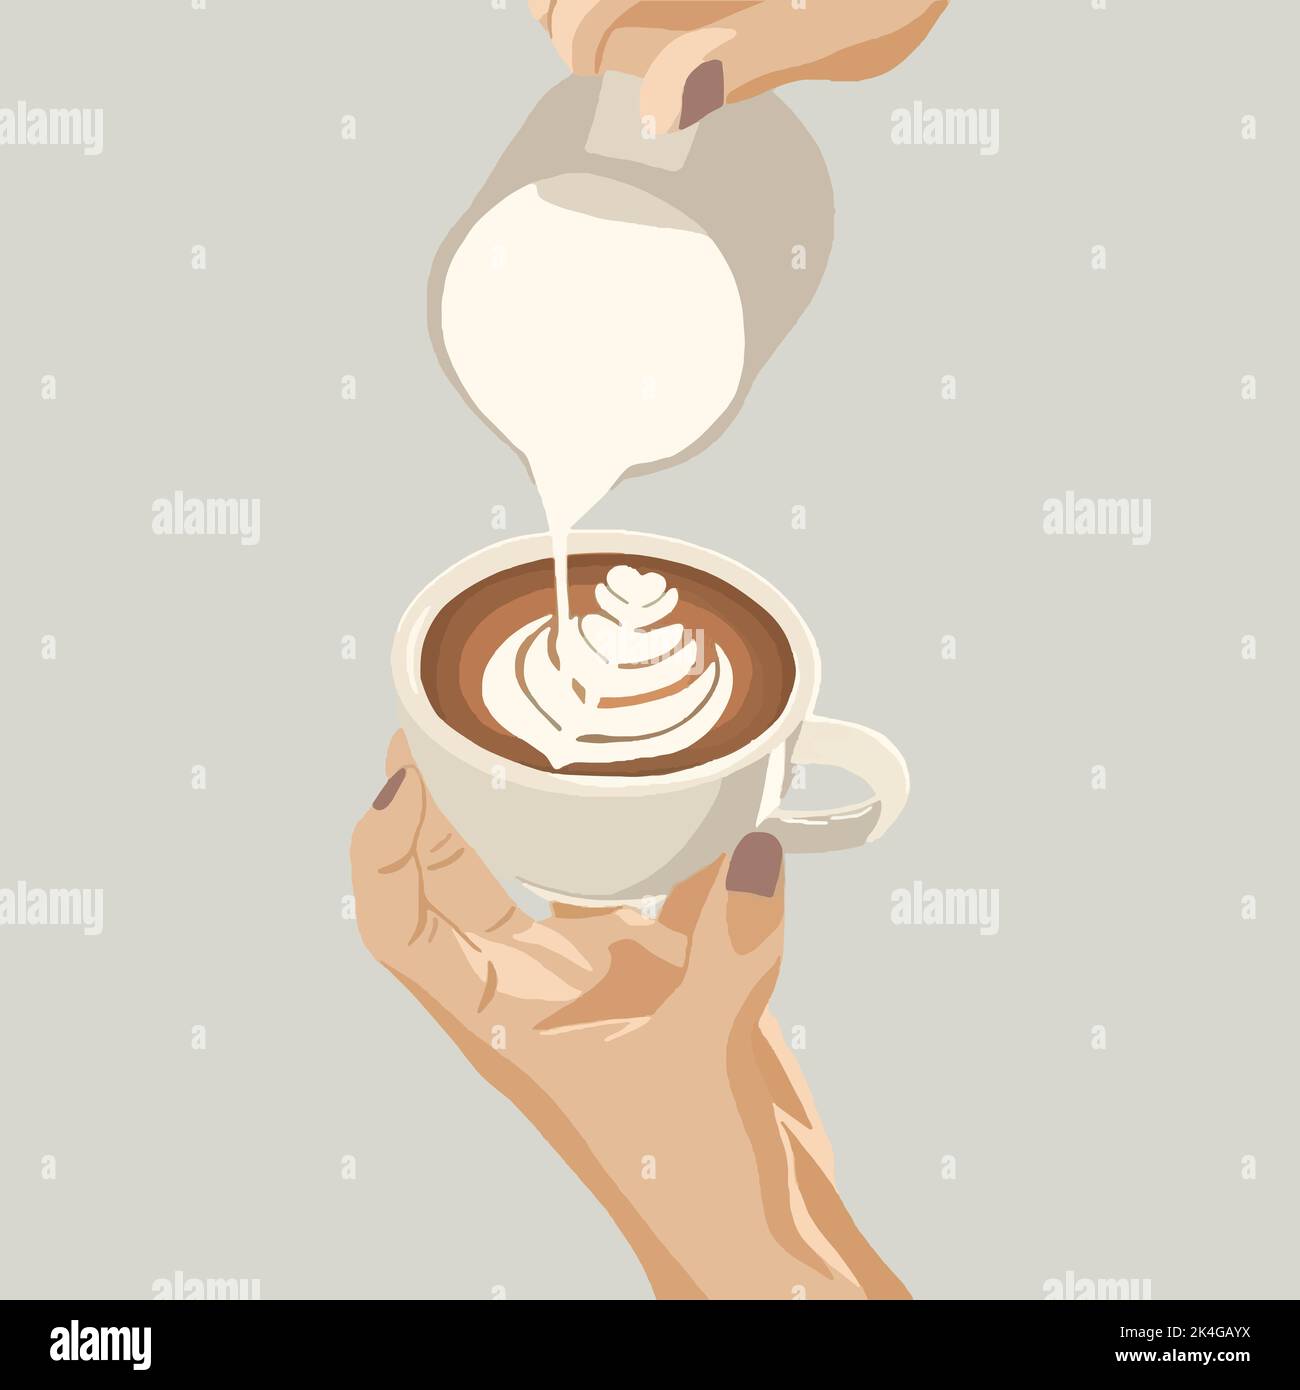 Hand of barista making latte or cappuccino coffee pouring milk making latte art. Vector illustration Stock Vector